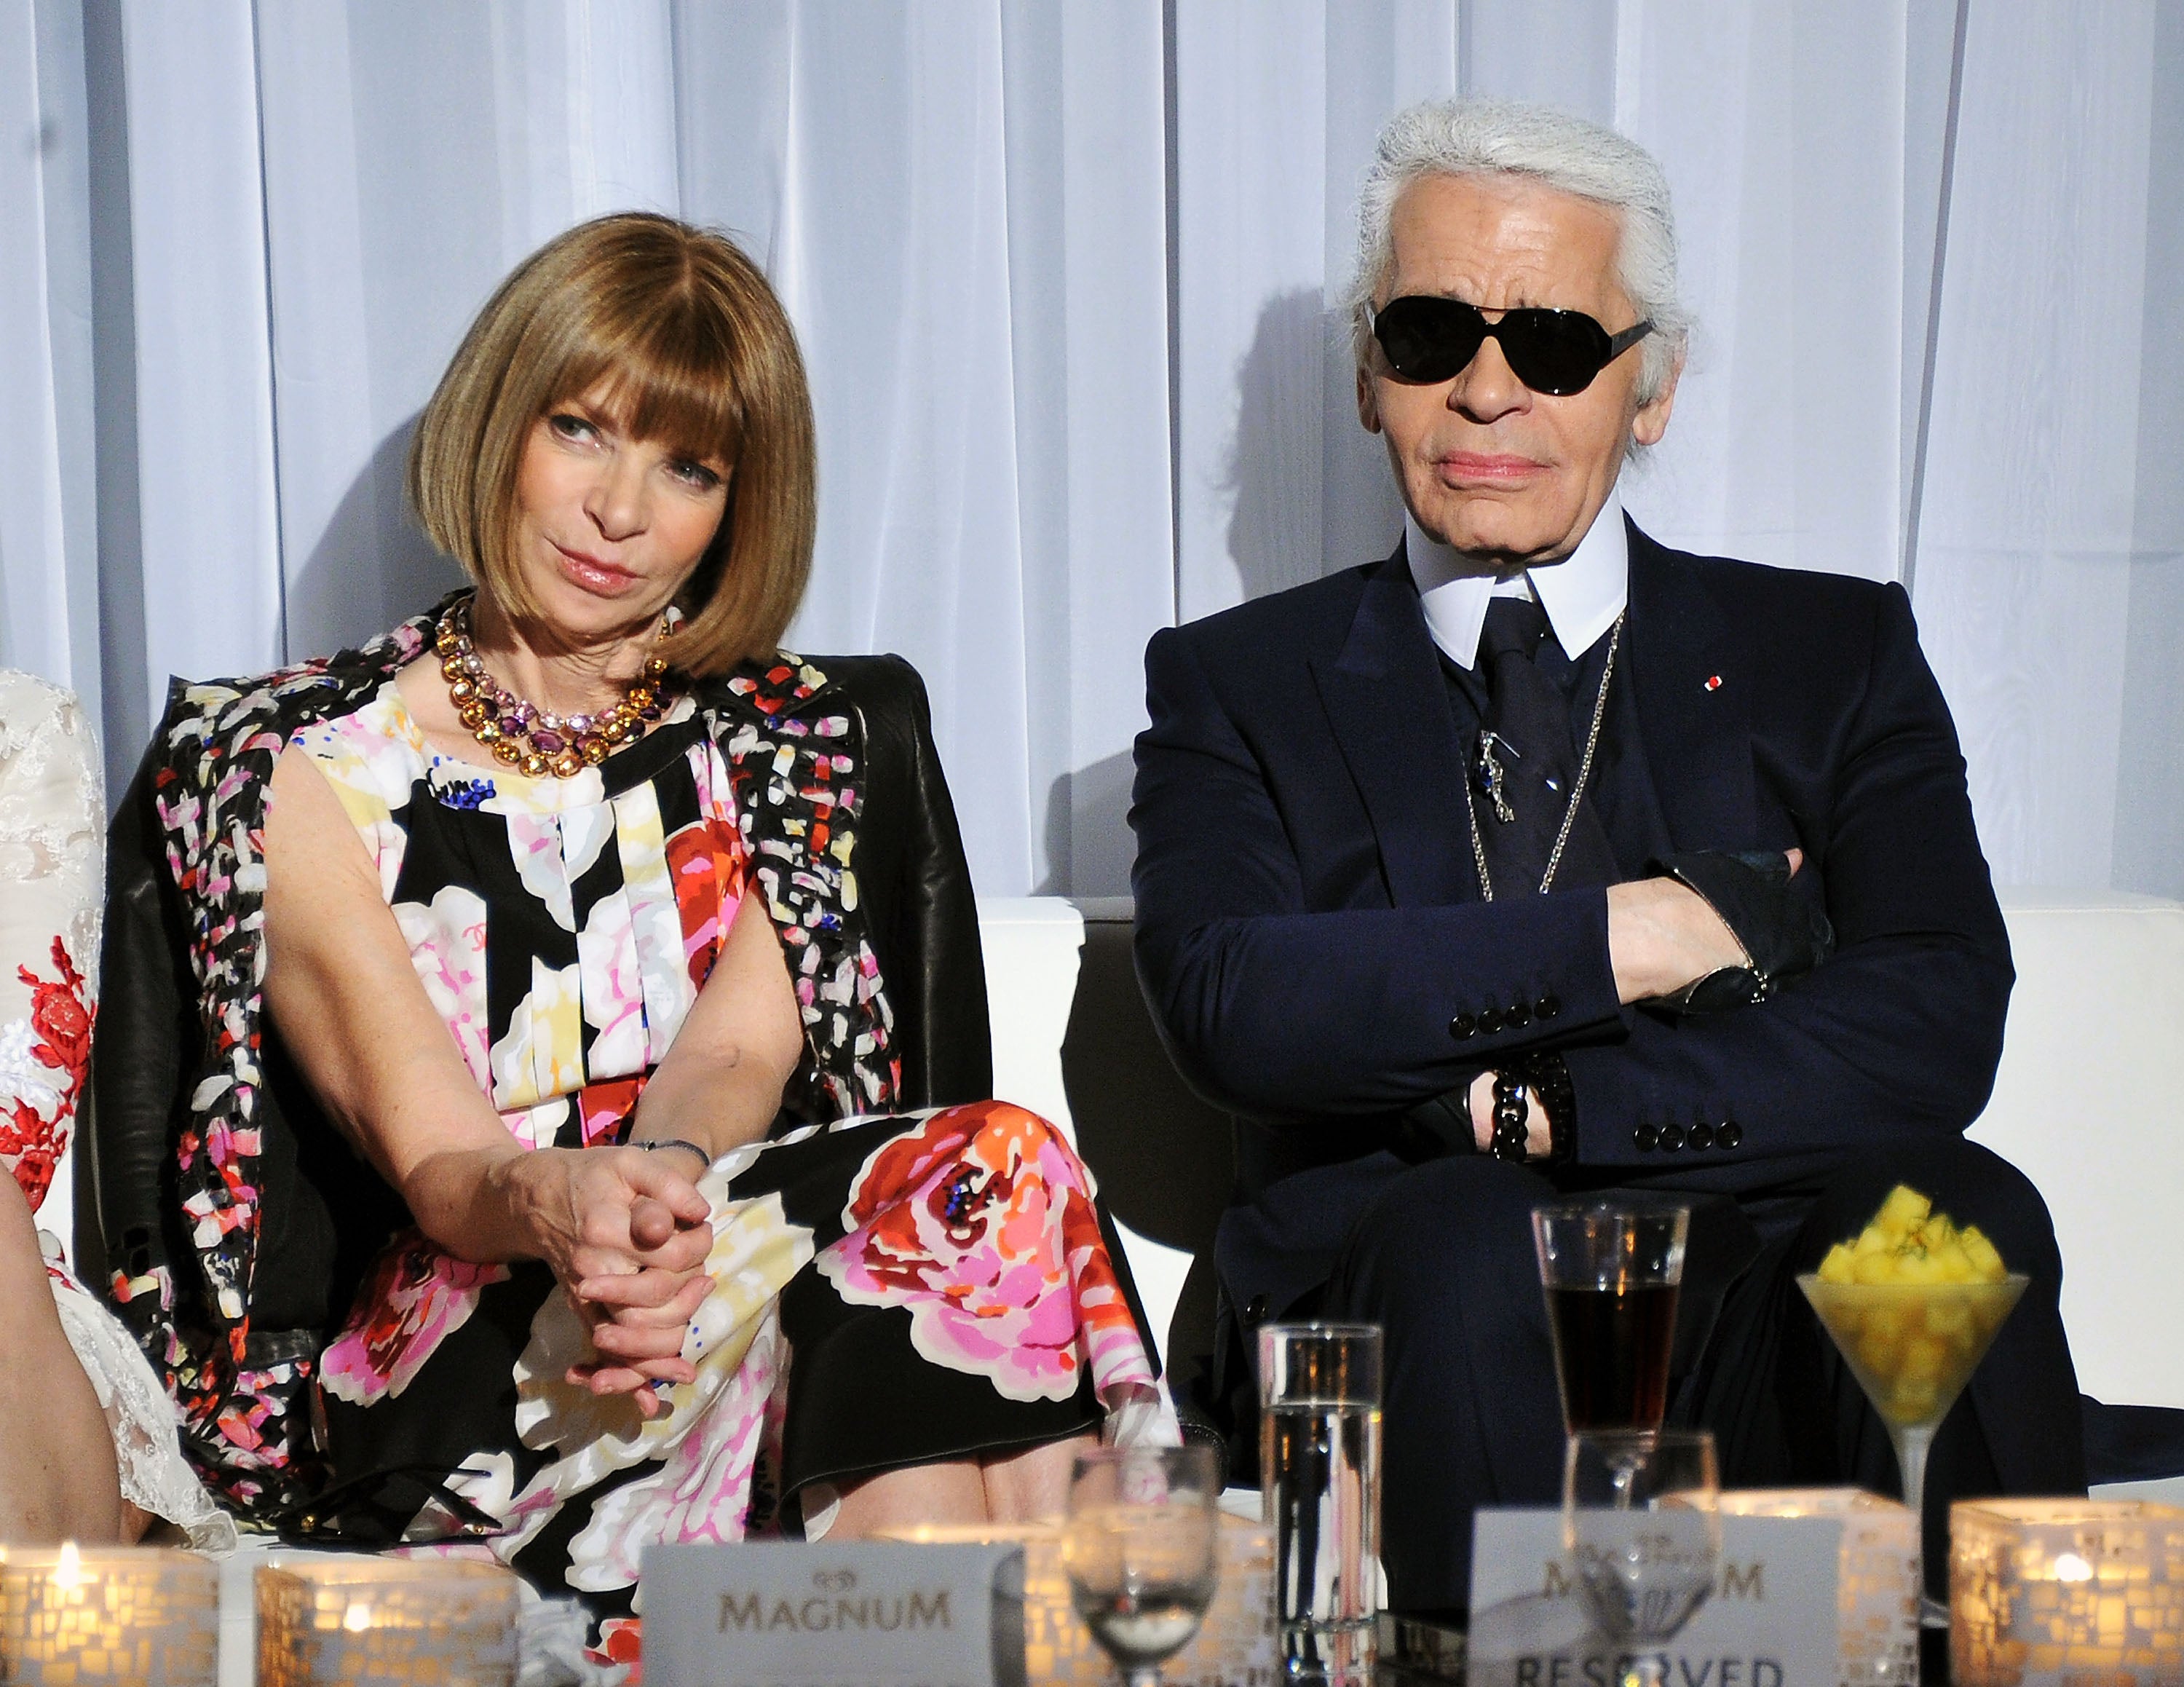 Anna Wintour revealed she ‘bawled’ when she learned of Karl Lagerfeld’s passing